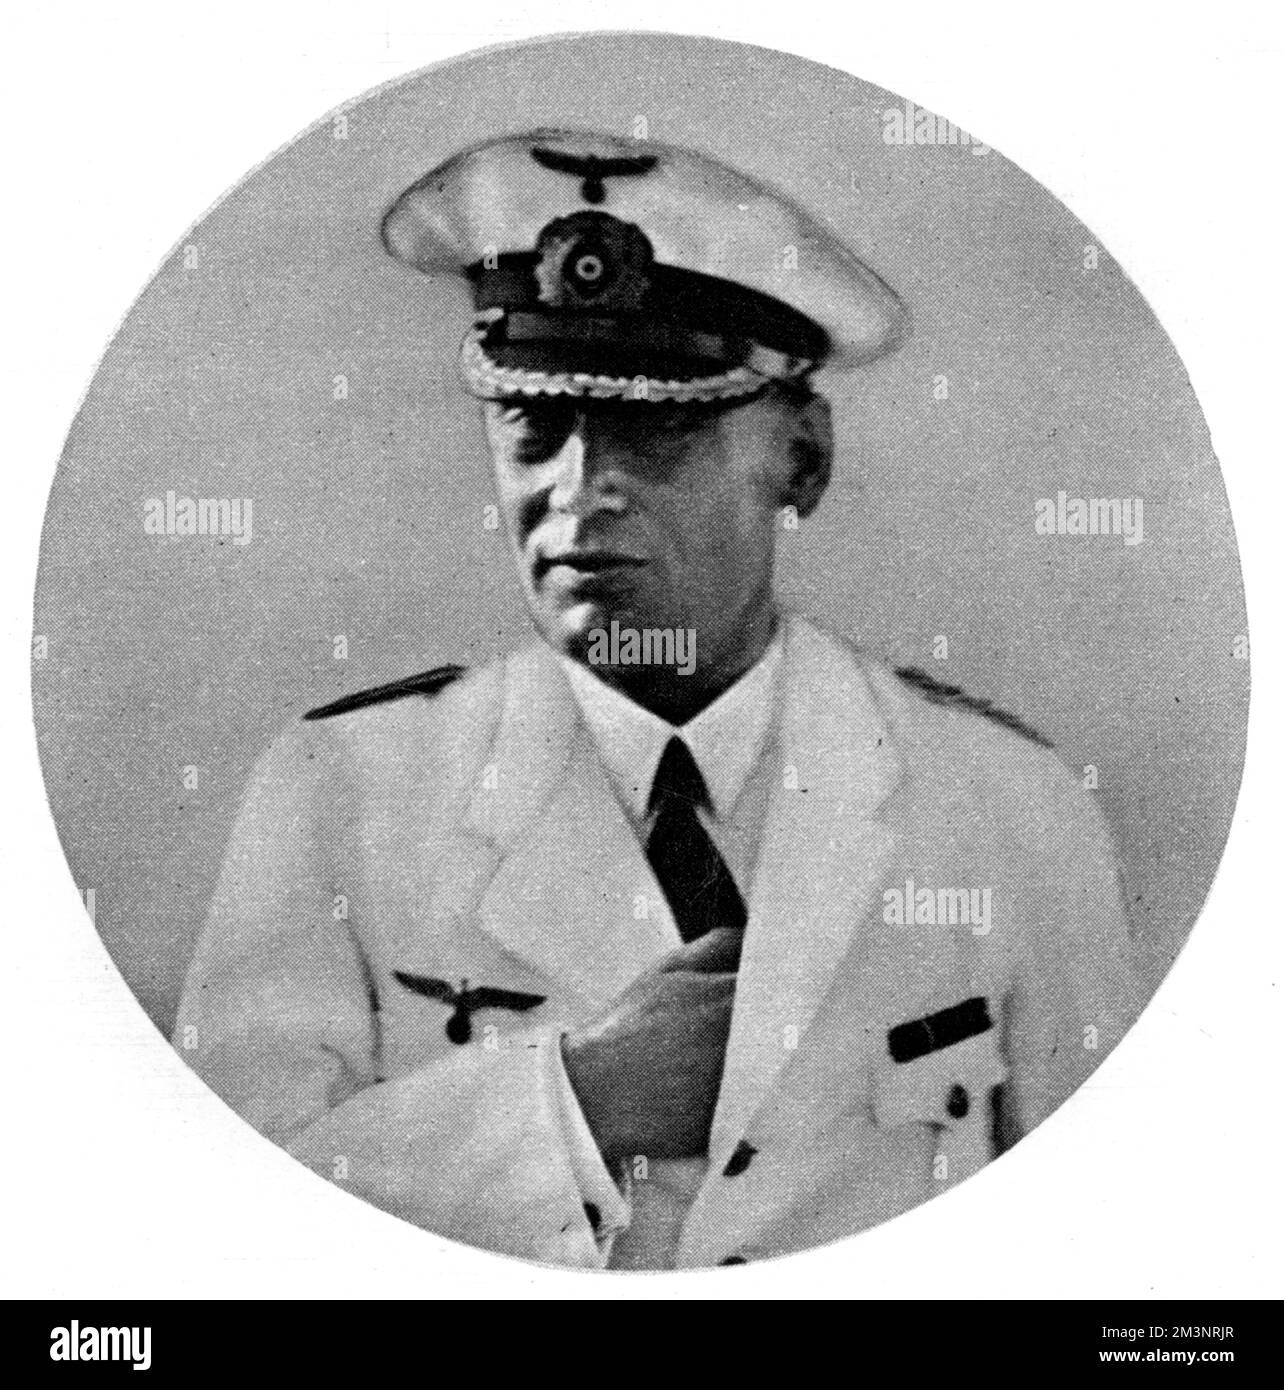 Captain Hans Wilhelm Langsdorff (1894 - 1939), German naval officer and commander of the Admiral Graf Spee pocket-battleship which was scuttled after the Battle of River Plate near Montevideo in Uruguay. Langsdorff shot himself shortly afterwards on 19th December 1939. This is one of the last photographs taken of him.     Date: December 1939 Stock Photo